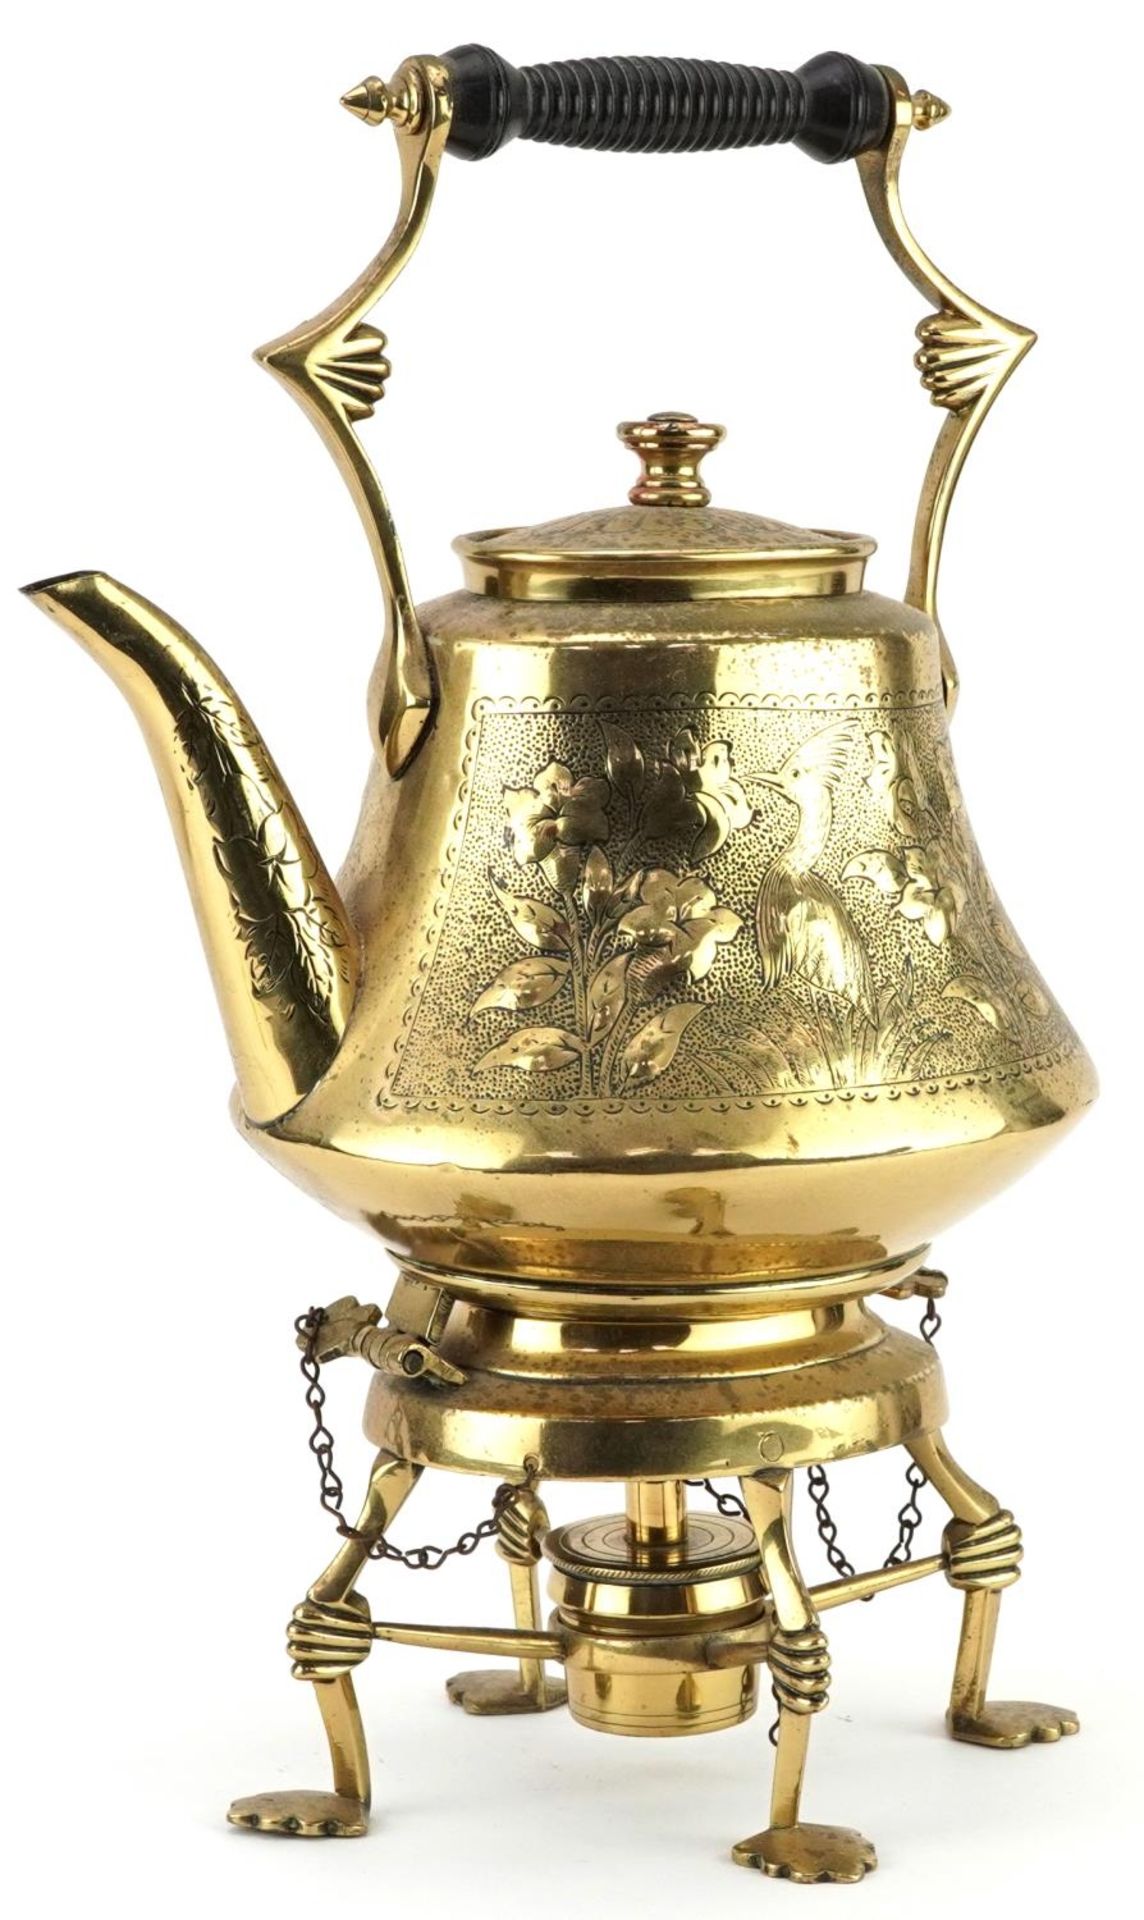 European Secessionist brass teapot on stand with burner, engraved and embossed with birds amongst